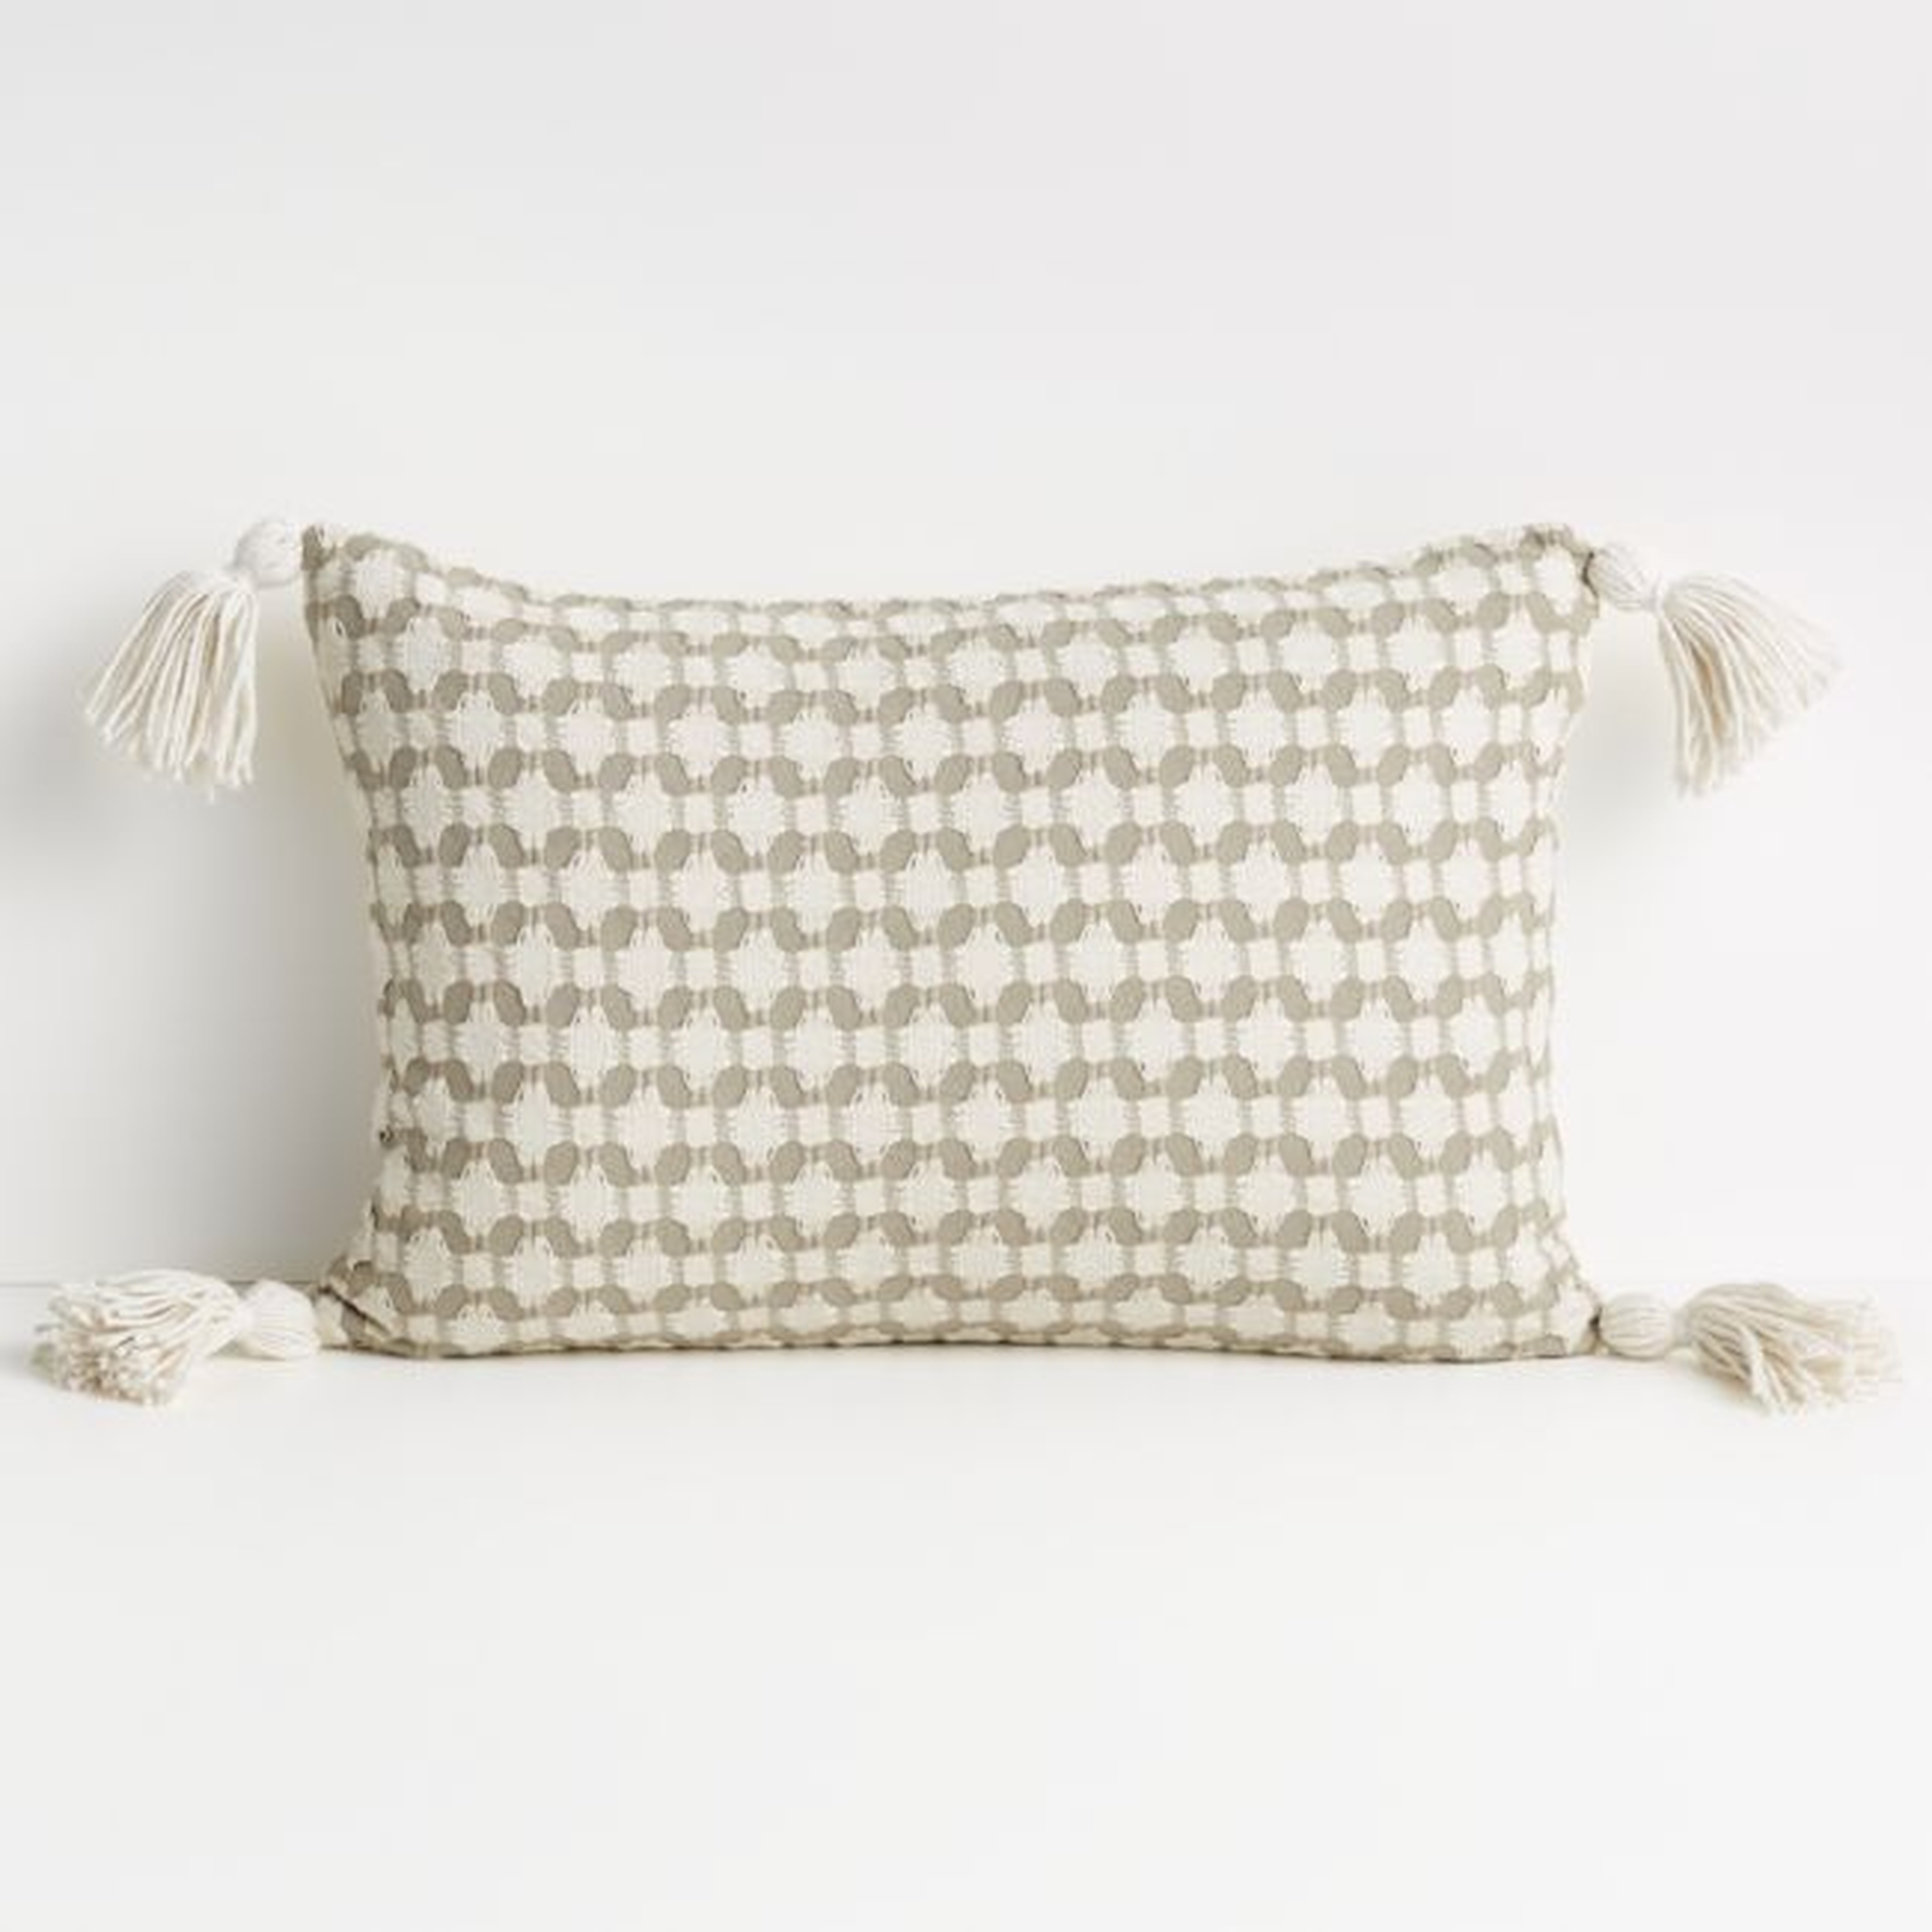 Tahona 18"x12" White Swan Textured Pillow Cover - Crate and Barrel